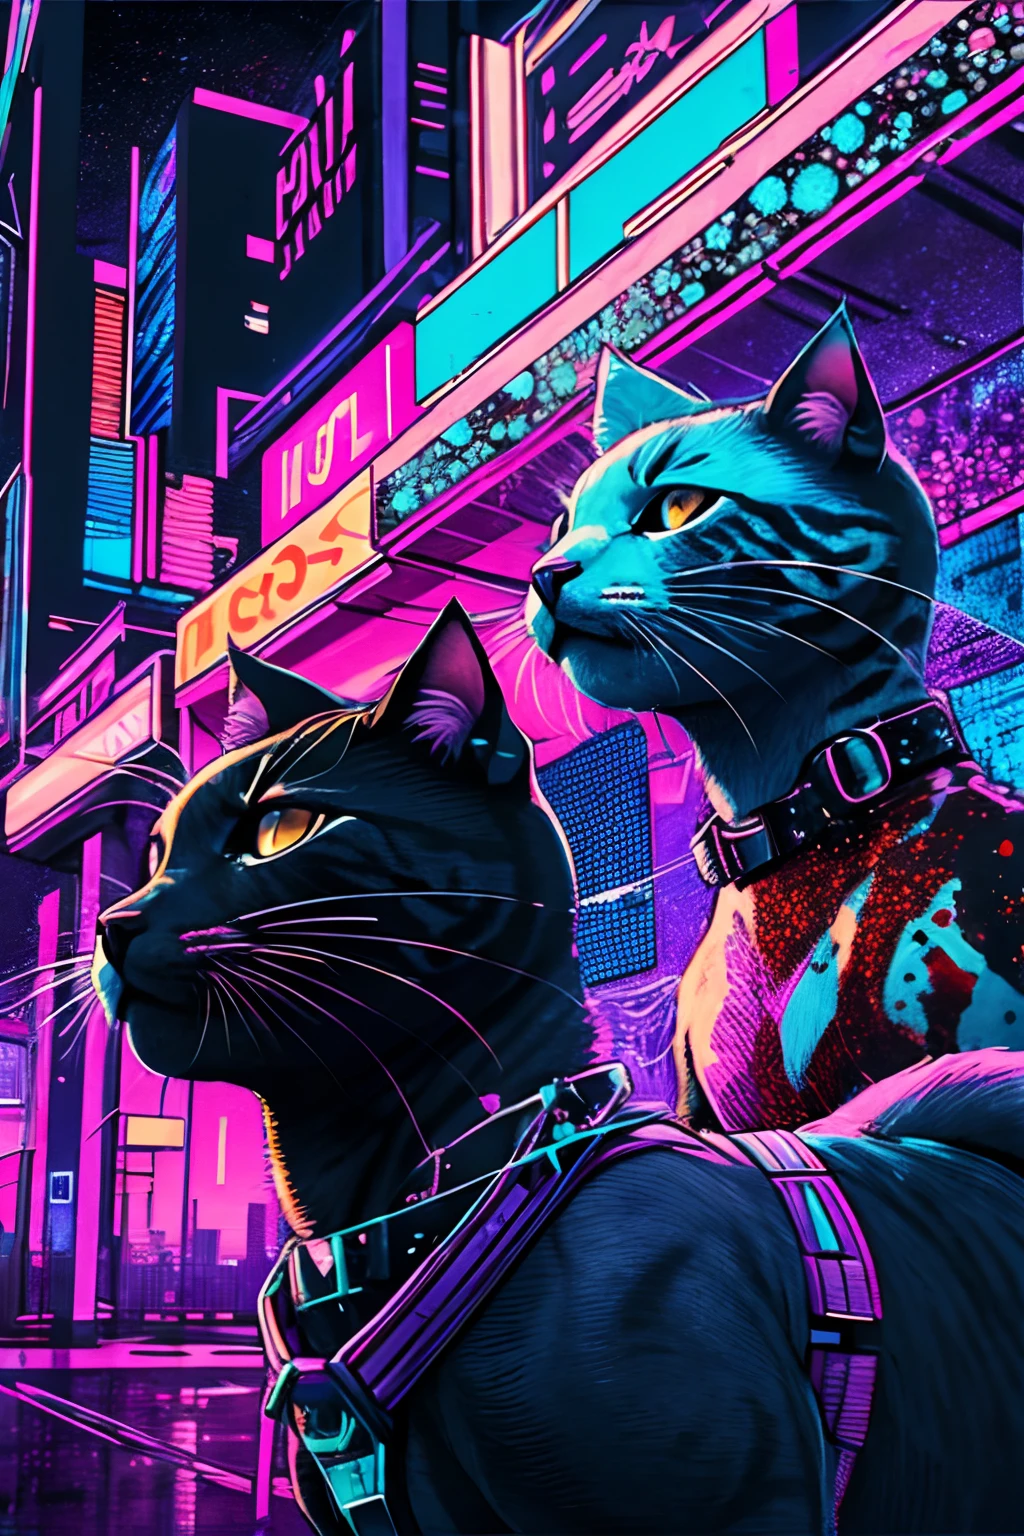 (masutepiece), Best Quality, Three cats、(gritty:0.9),(80's aesthetic:1.1),(neons:0.8),(Retro:0.9),(analogue:1.1),(Grim Reaper:0.5),(Purple and orange color scheme:0.9),(Black and white:0.6),(Drooping letters:0.8),(The aesthetics of vaporwave:1.2),(digital distortion:0.9),(Blood splatters:0.8),(darkness:0.9),